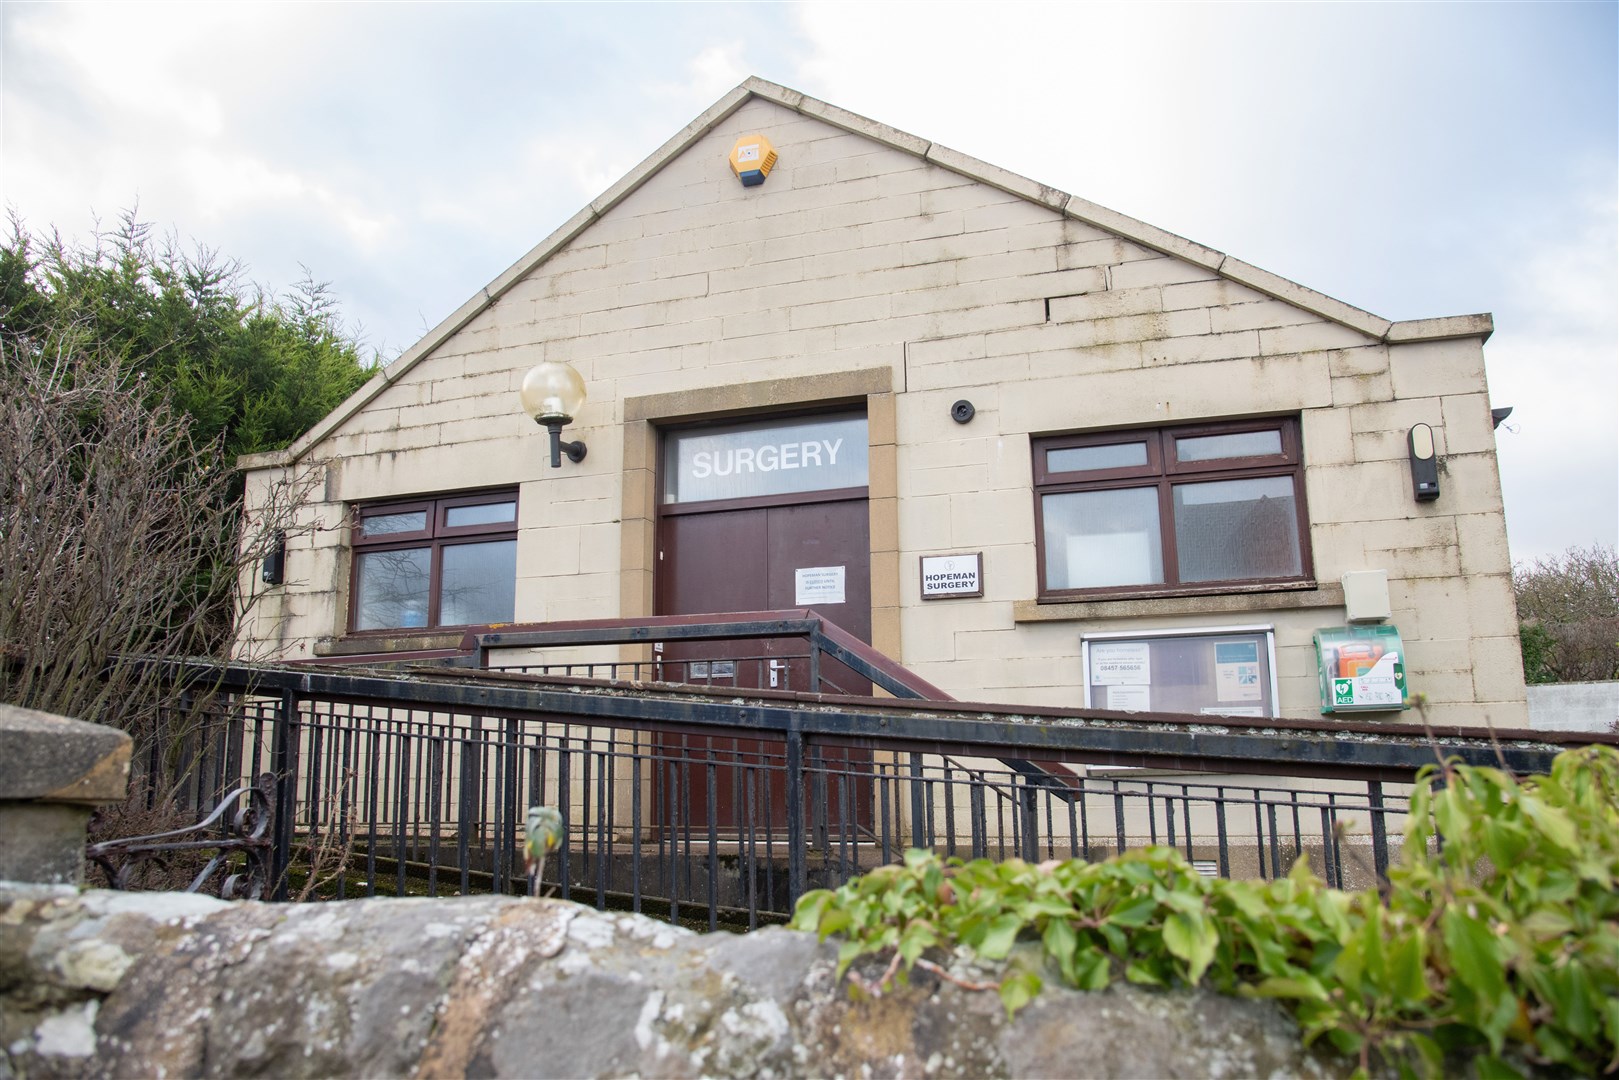 Plans for the closure of the branch surgeries in Burghead and Hopeman (pictured) were being discussed as early as June 2021. Picture: Daniel Forsyth